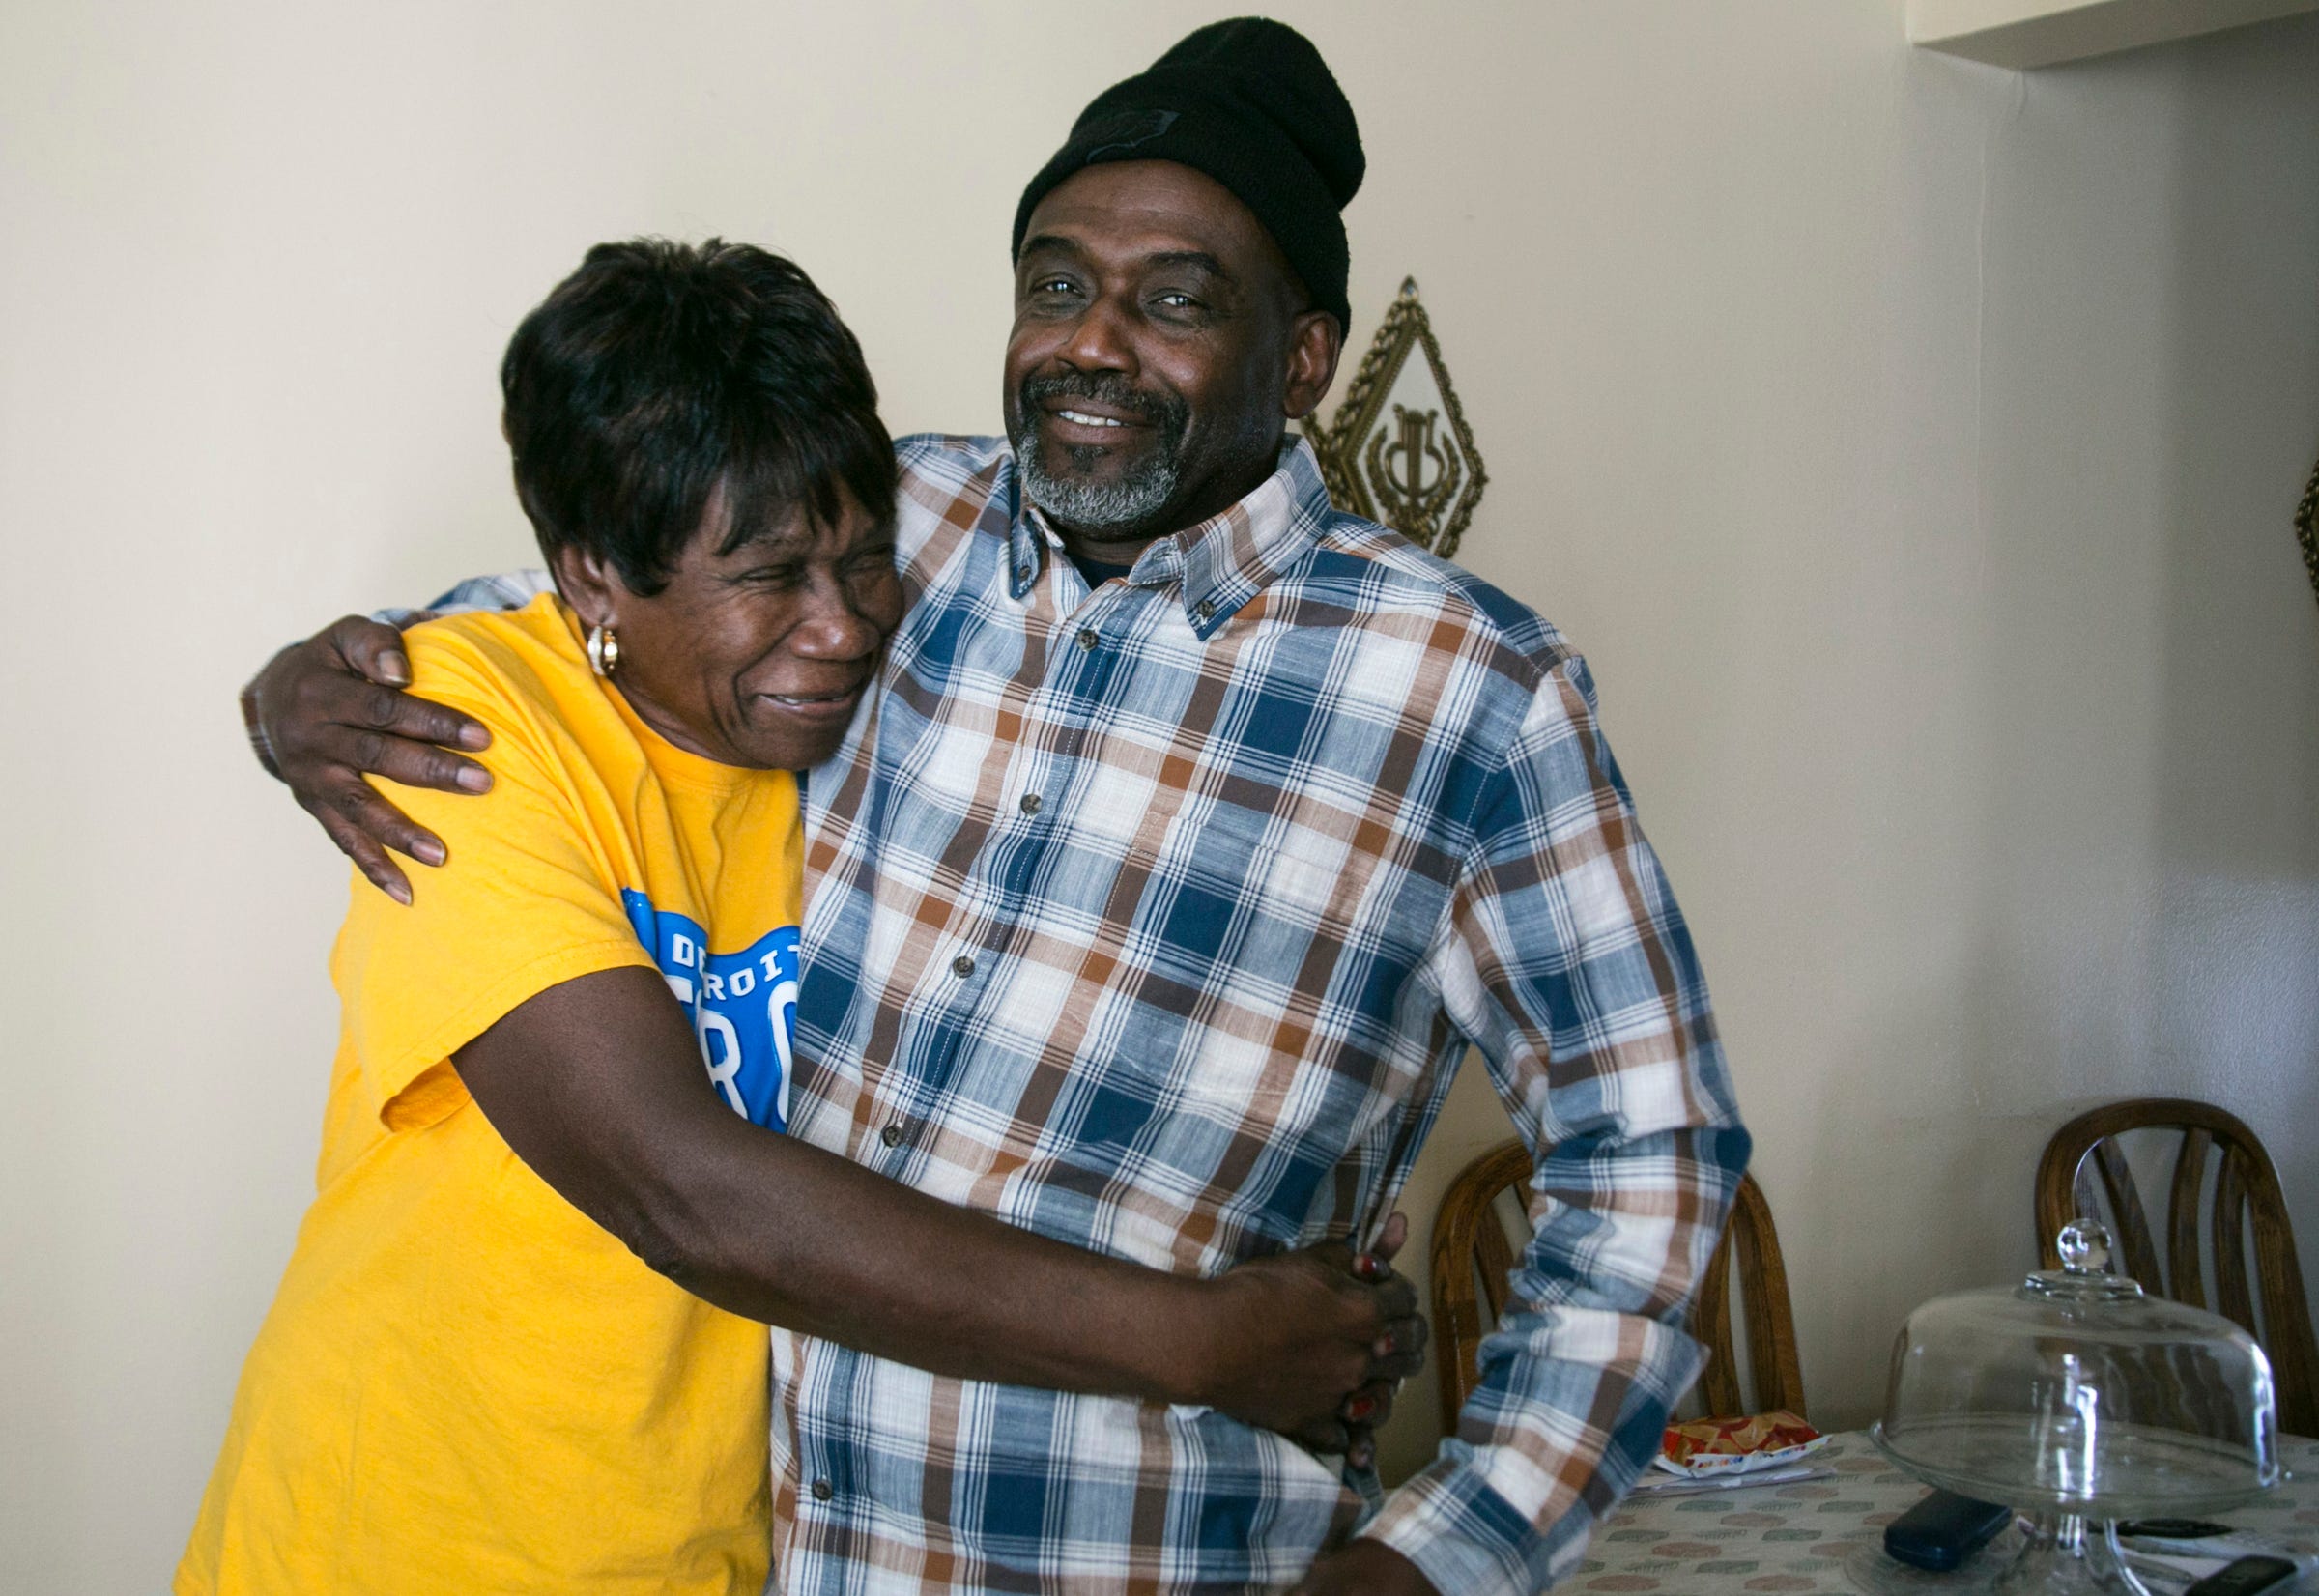 David Lee Walton, 60, released from prison in April after 43-years behind bars, is photographed at home in Detroit, Mich., Thursday, October 26, 2017. He was sentenced at 17 to mandatory life without parole after being found guilty of first-degree murder.